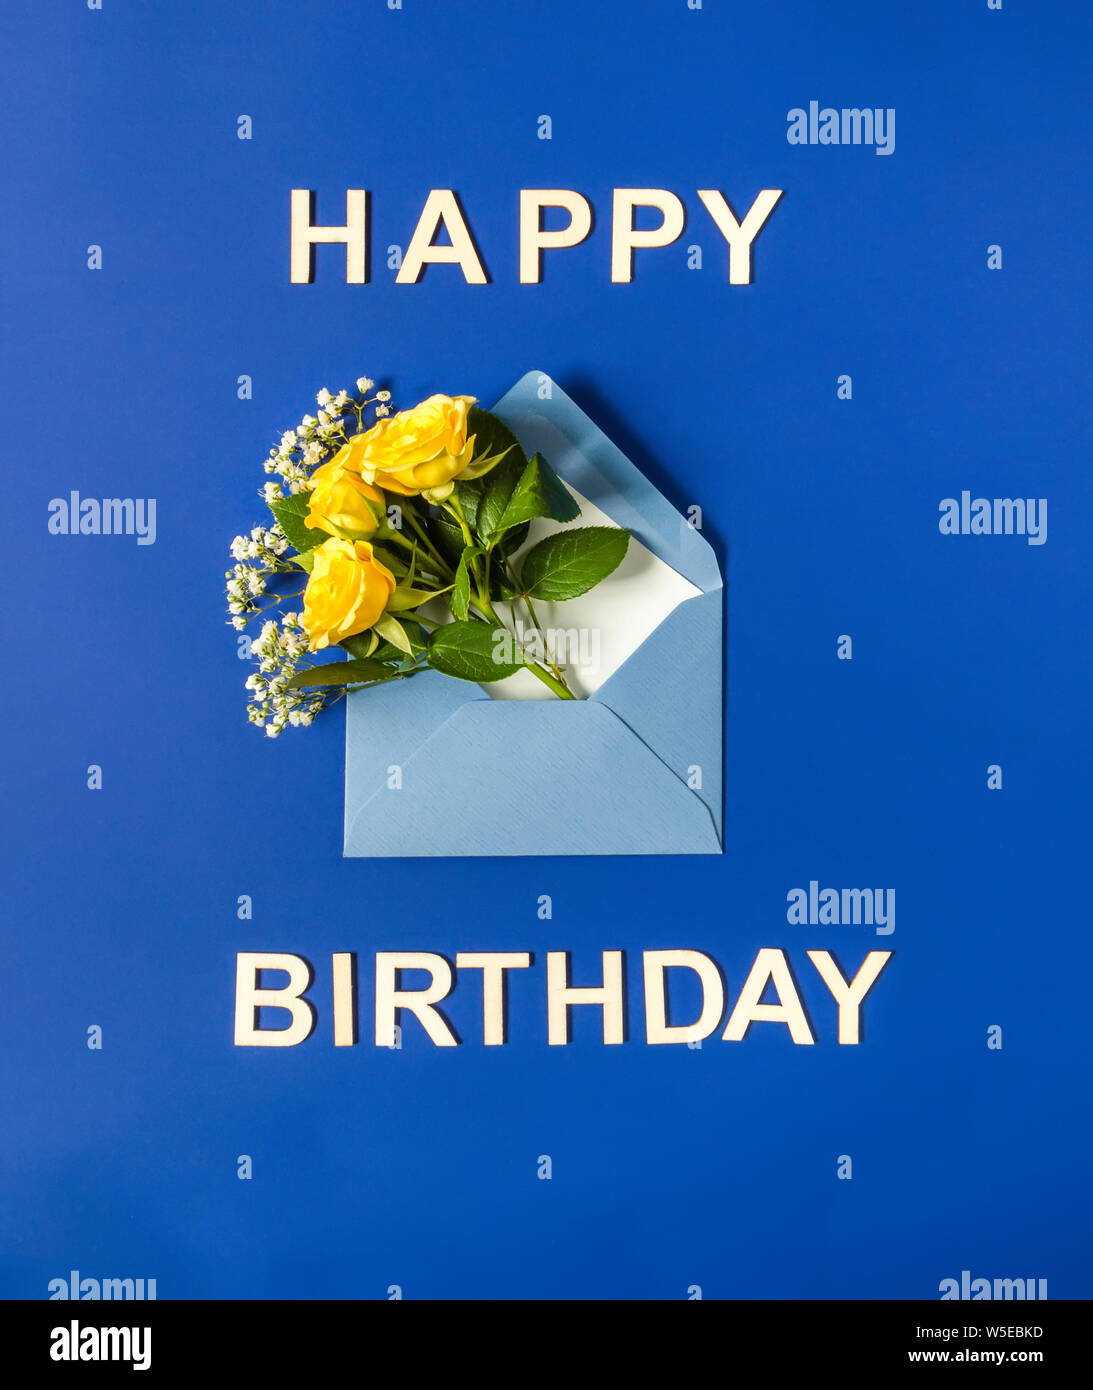 Yellow roses and white Gypsophila in blue envelope close-up on blue background. Text Happy Birthday, wooden letters. Top view, flat lay. Template for Stock Photo